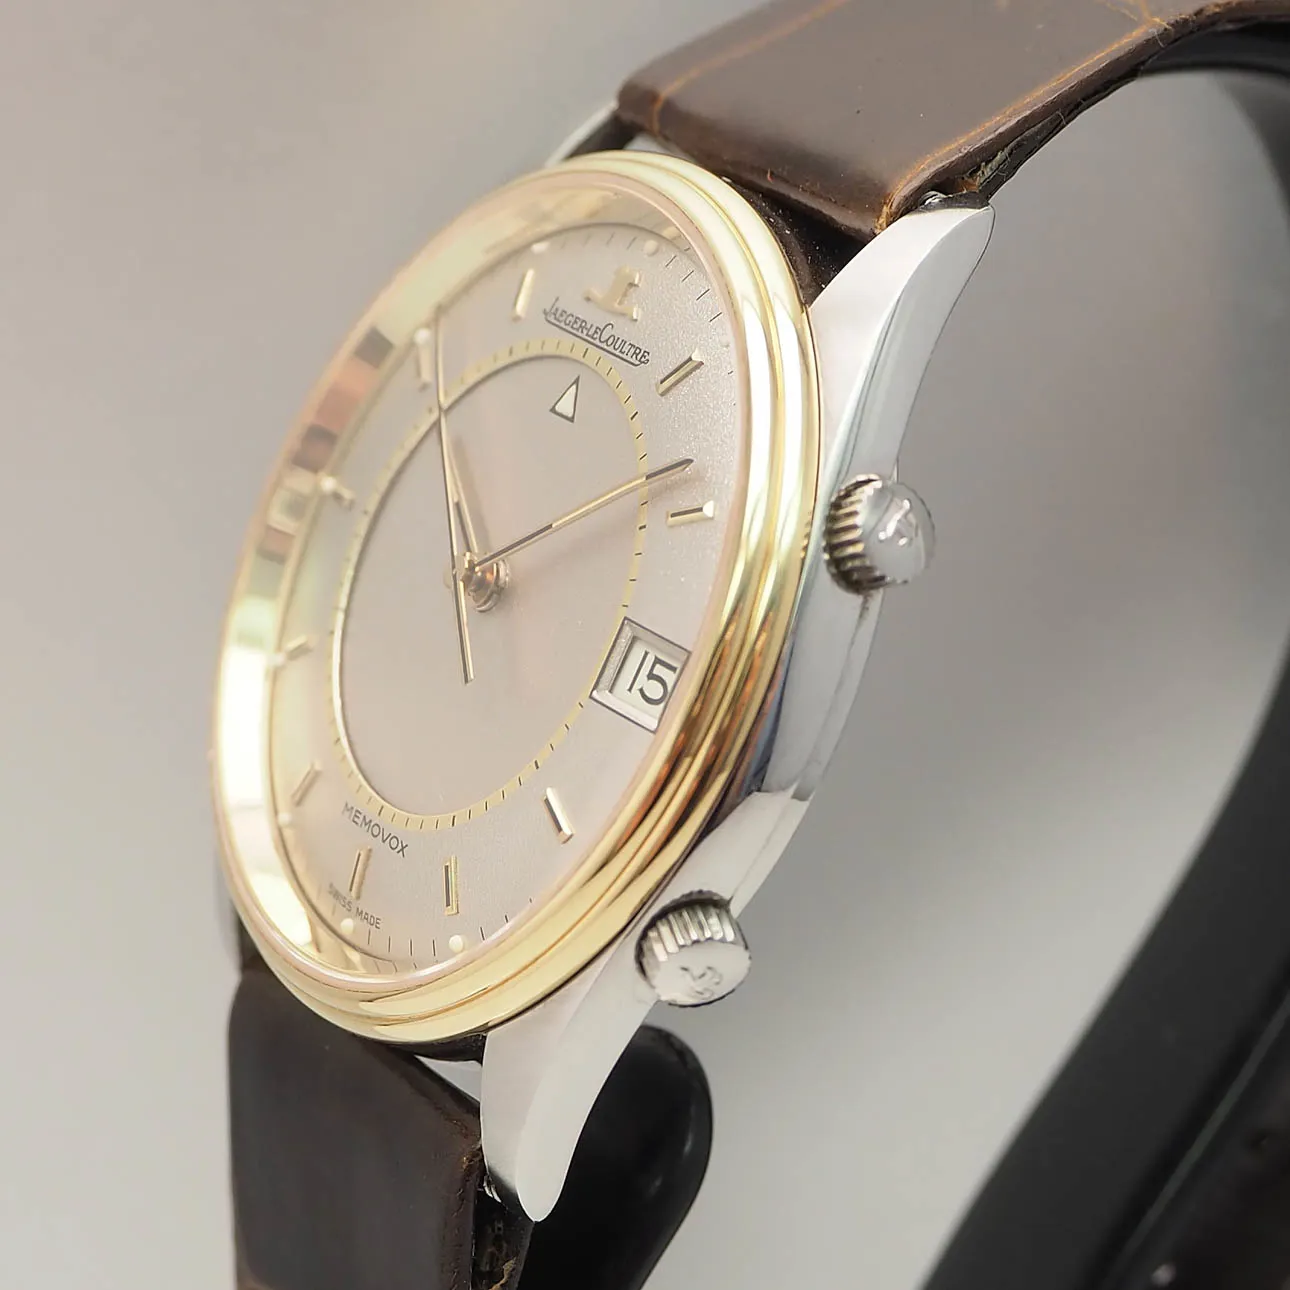 Jaeger-LeCoultre Memovox 141.012.5 36mm Yellow gold 4